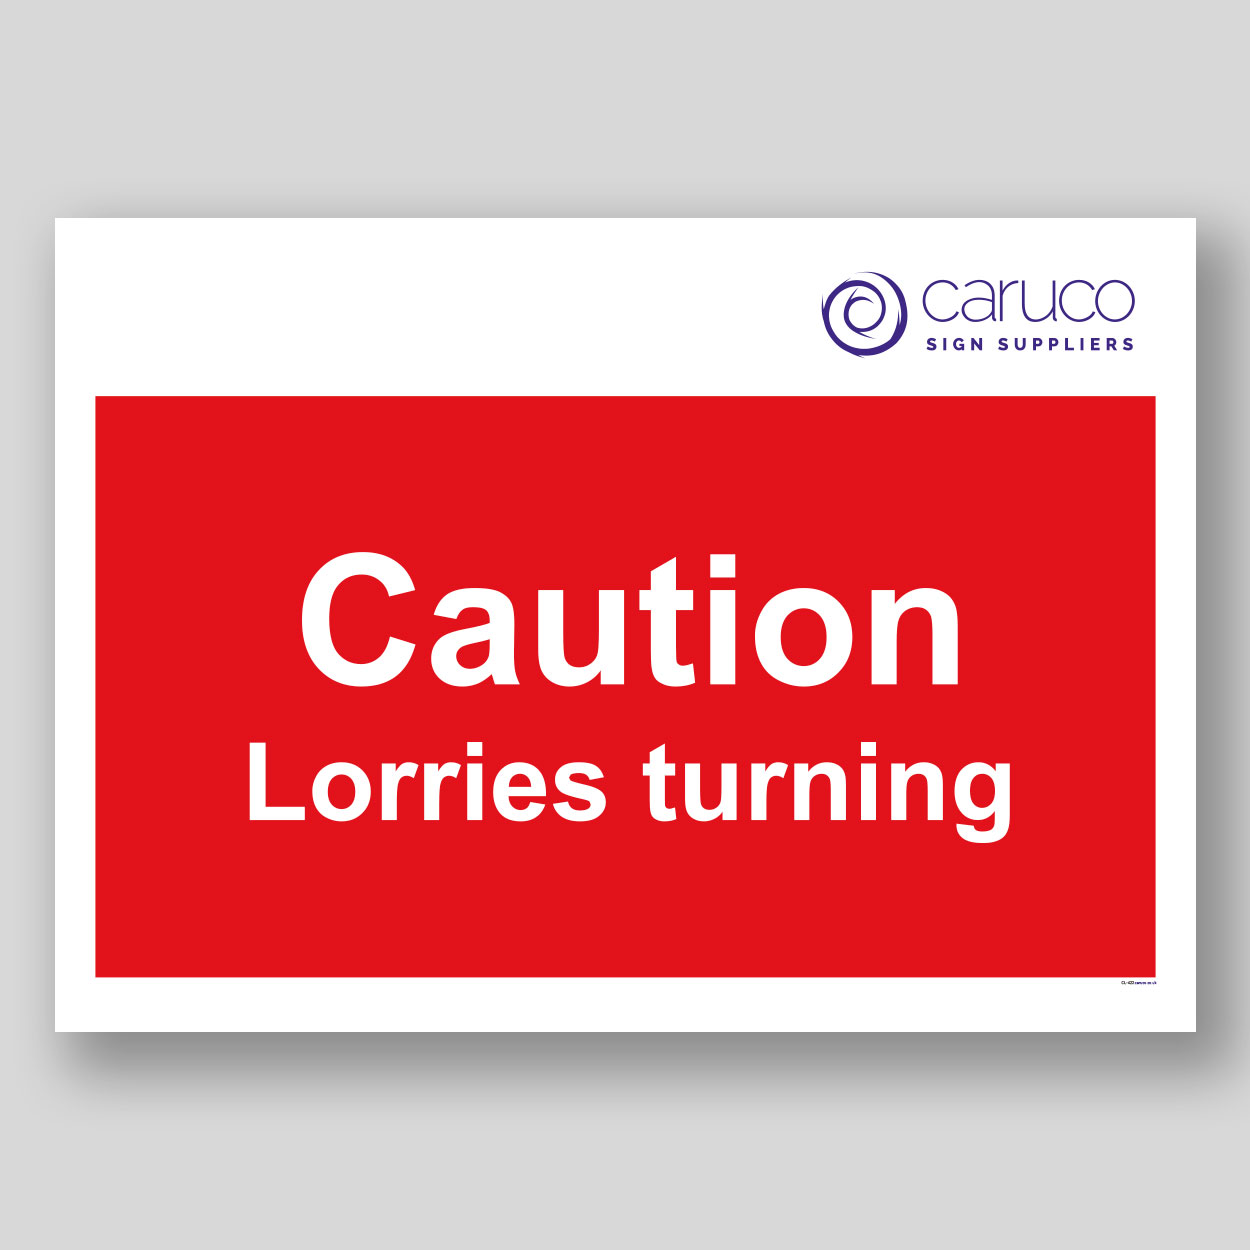 CL-423 Caution - lorries turning